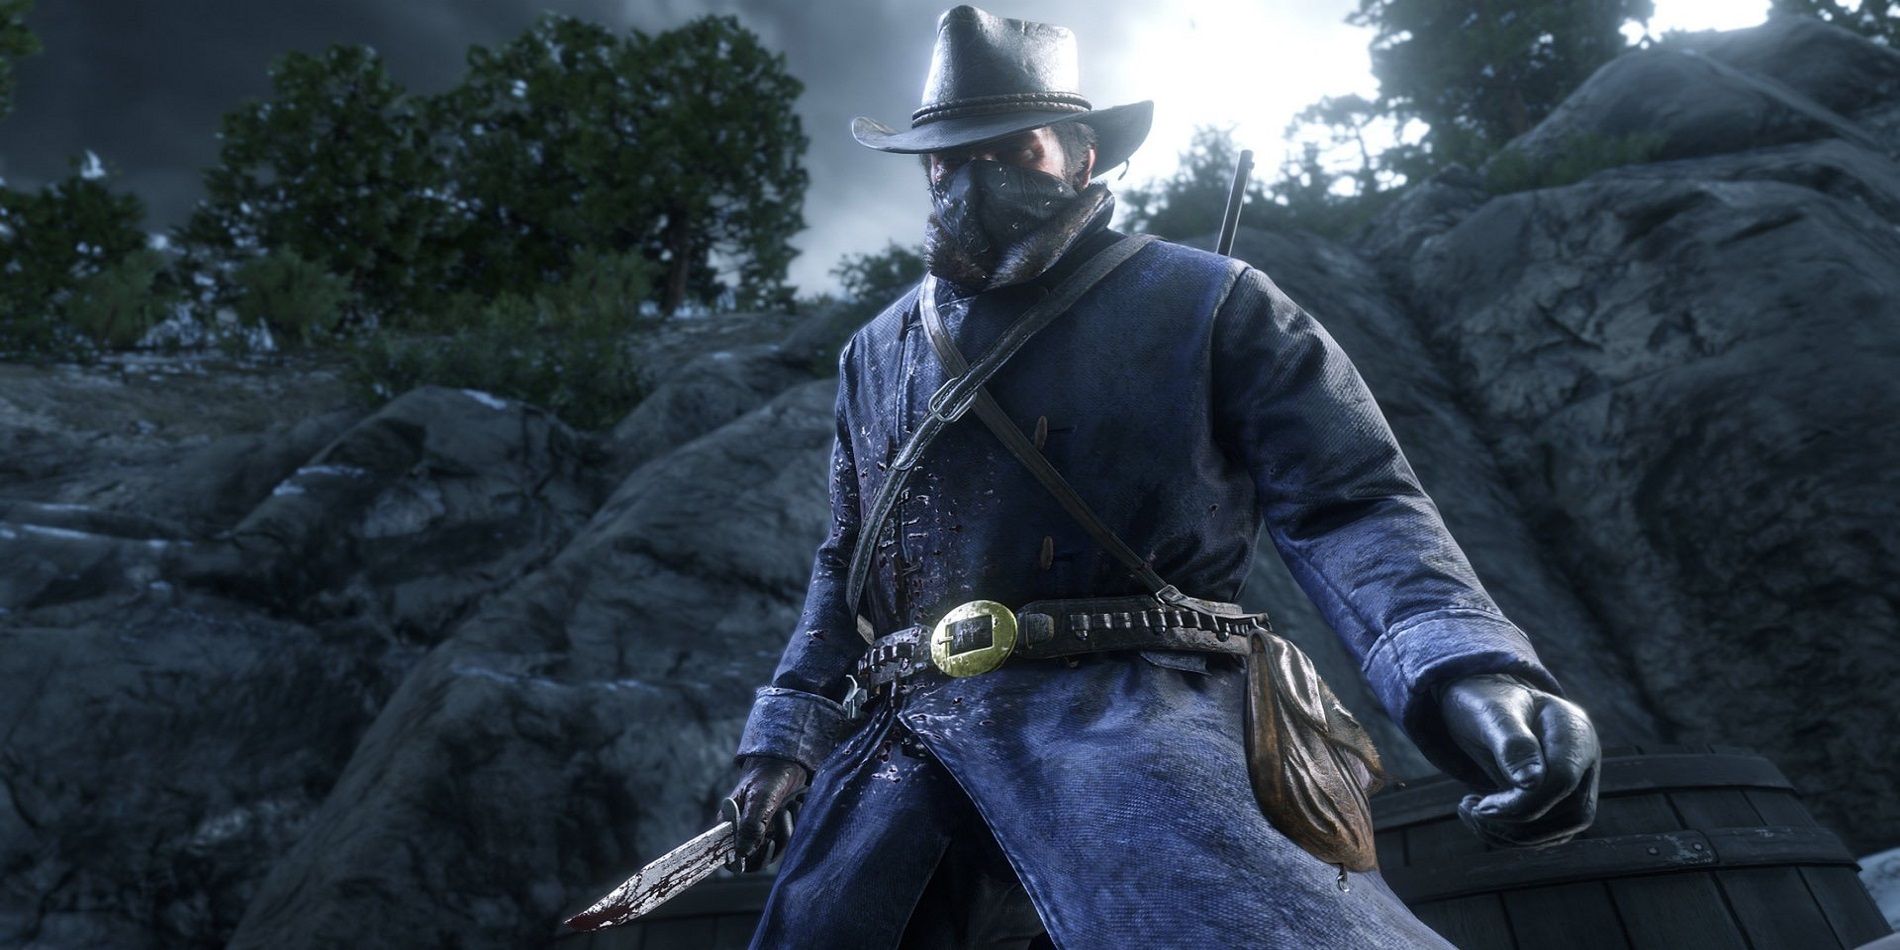 RDR2 Arthur Morgan Armed With A Bloody Knife in the Moonlight